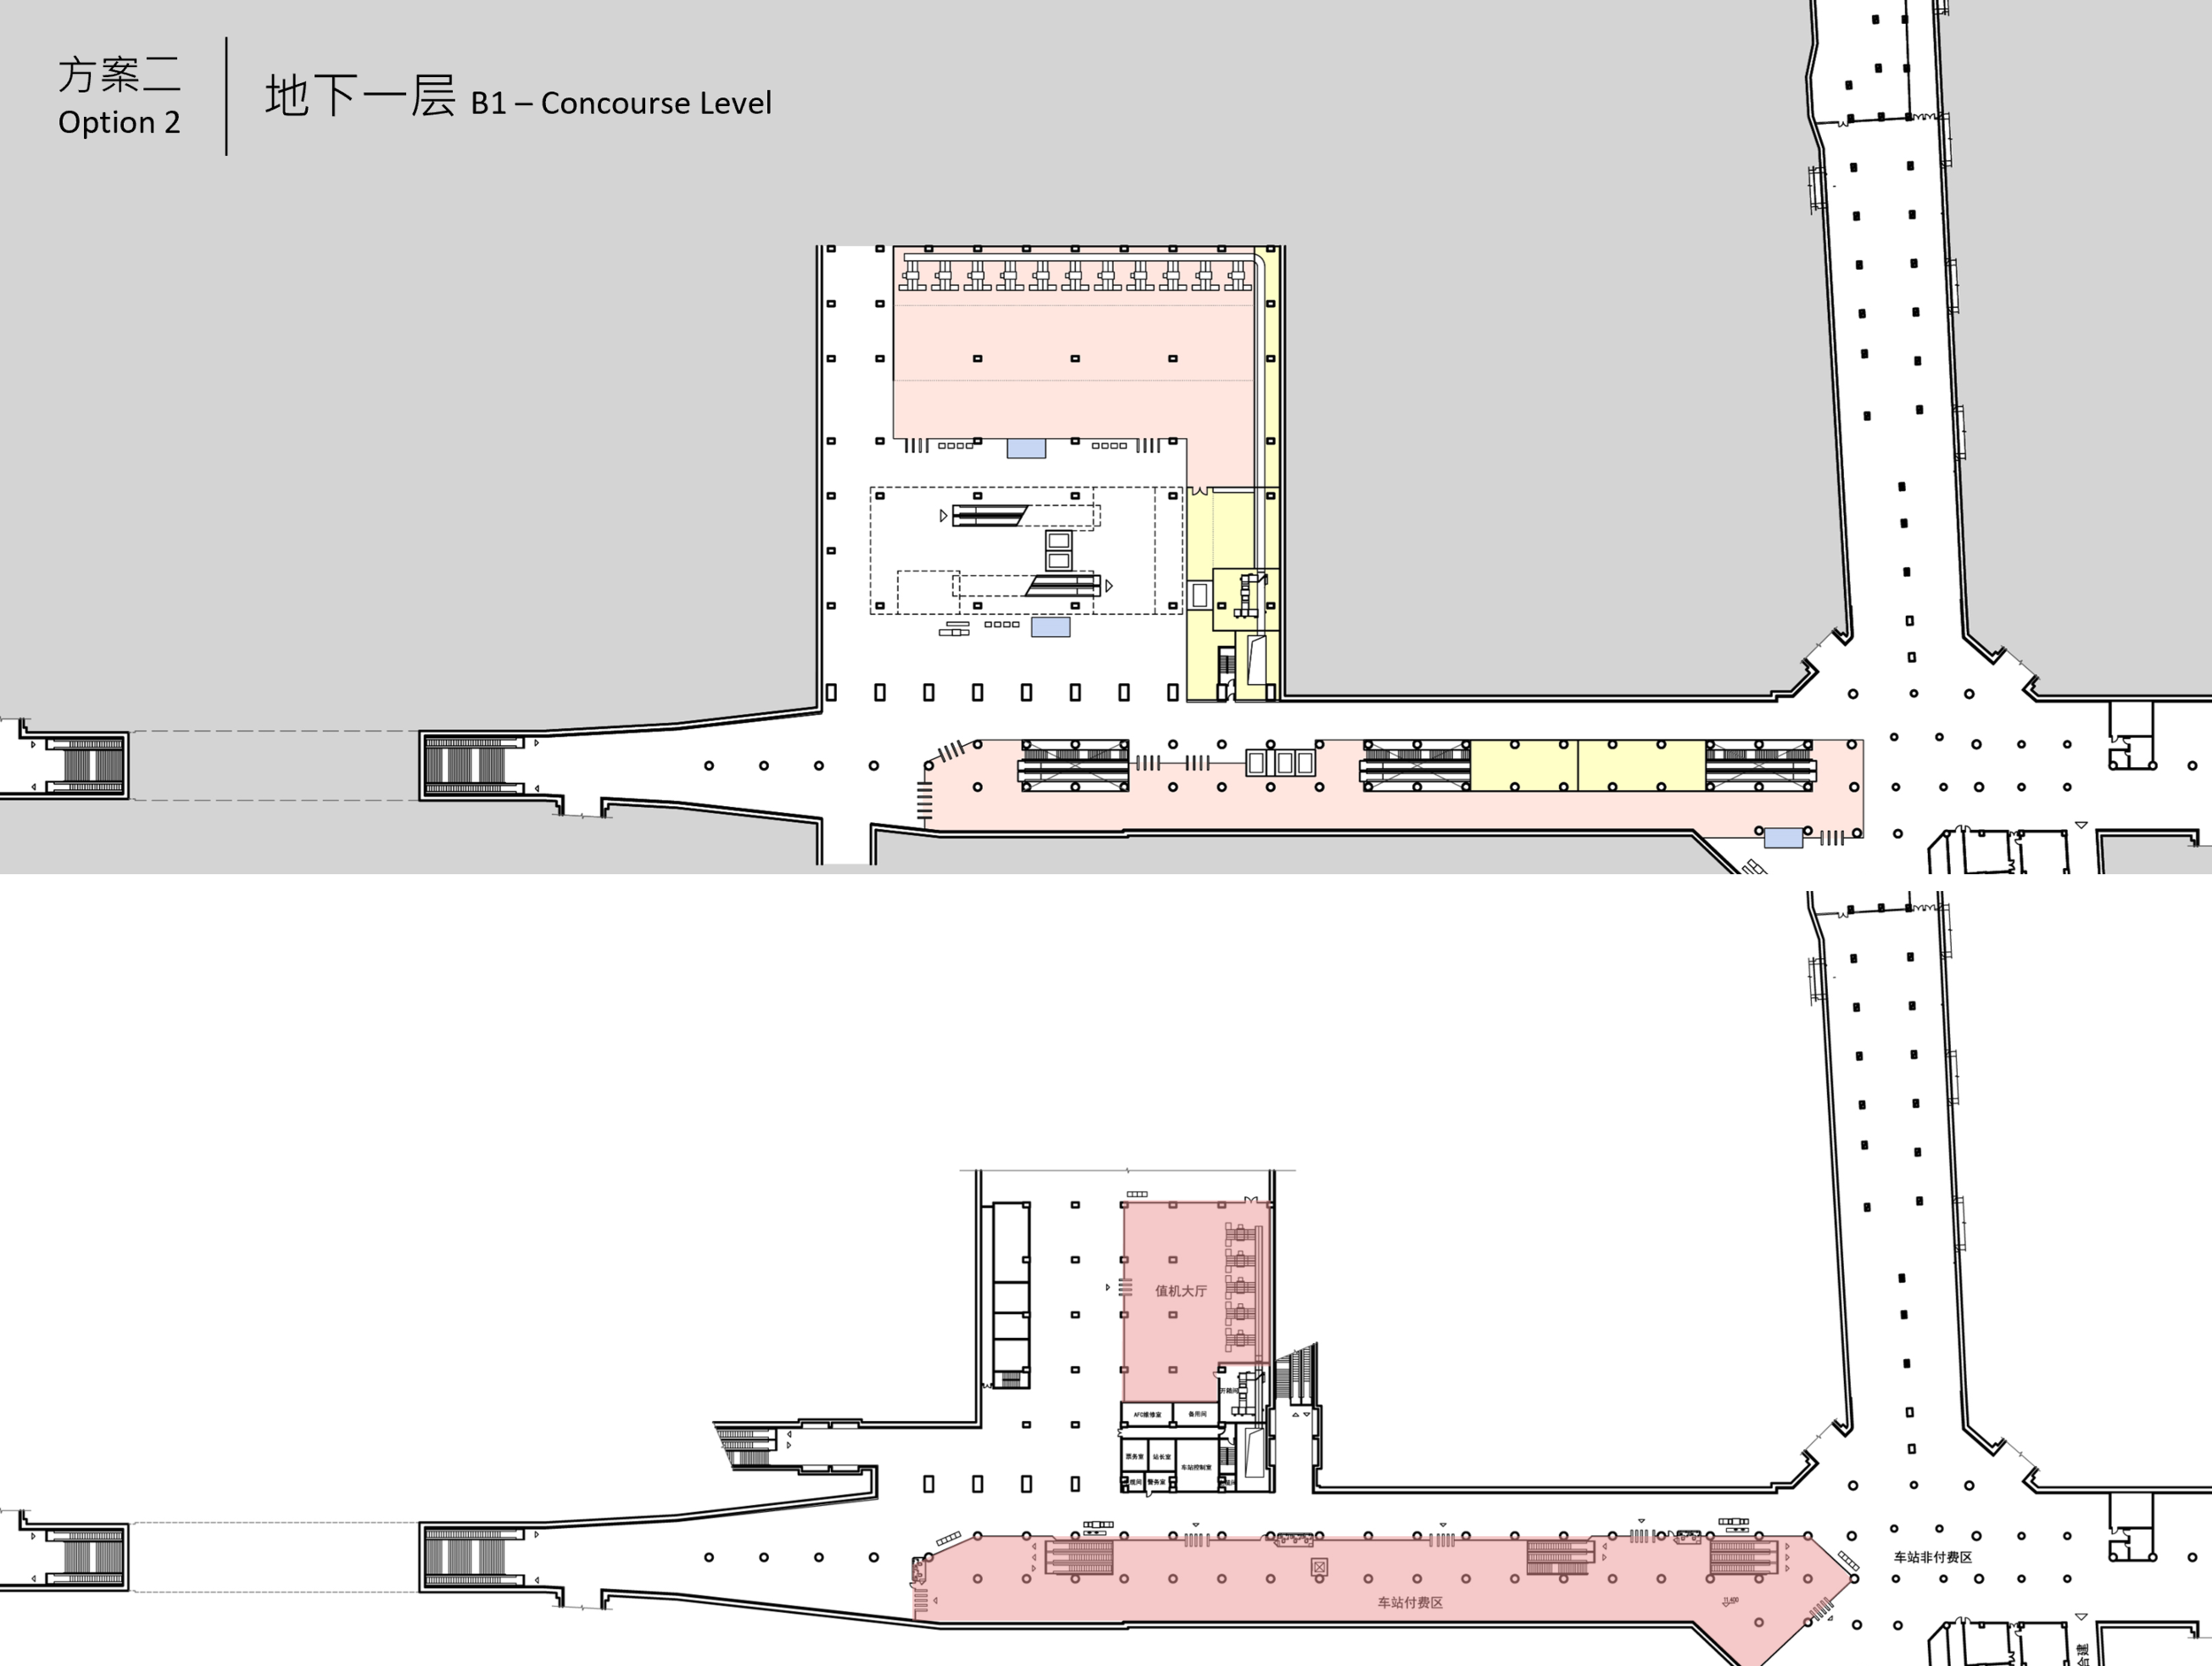 Floor plans of one of the alternatives for the Terminal